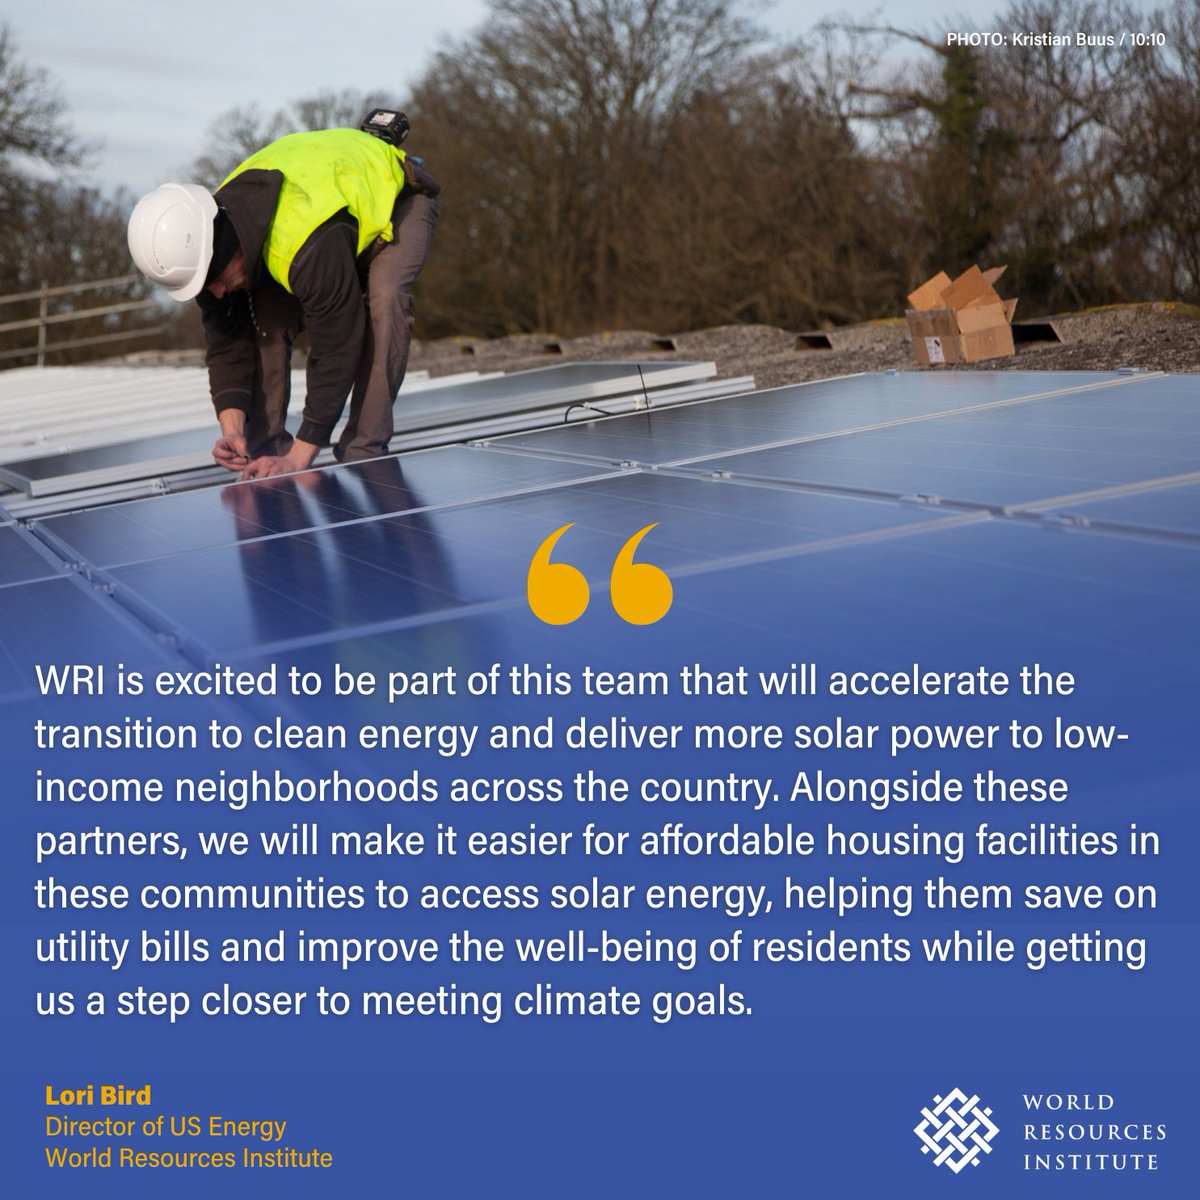 .@GRID has been selected as one of the recipients of the #SolarforAll grant from the @EPA as part of the #InflationReductionAct! ☀️ @WRIEnergy is a proud coalition partner: bit.ly/3QhHLpH